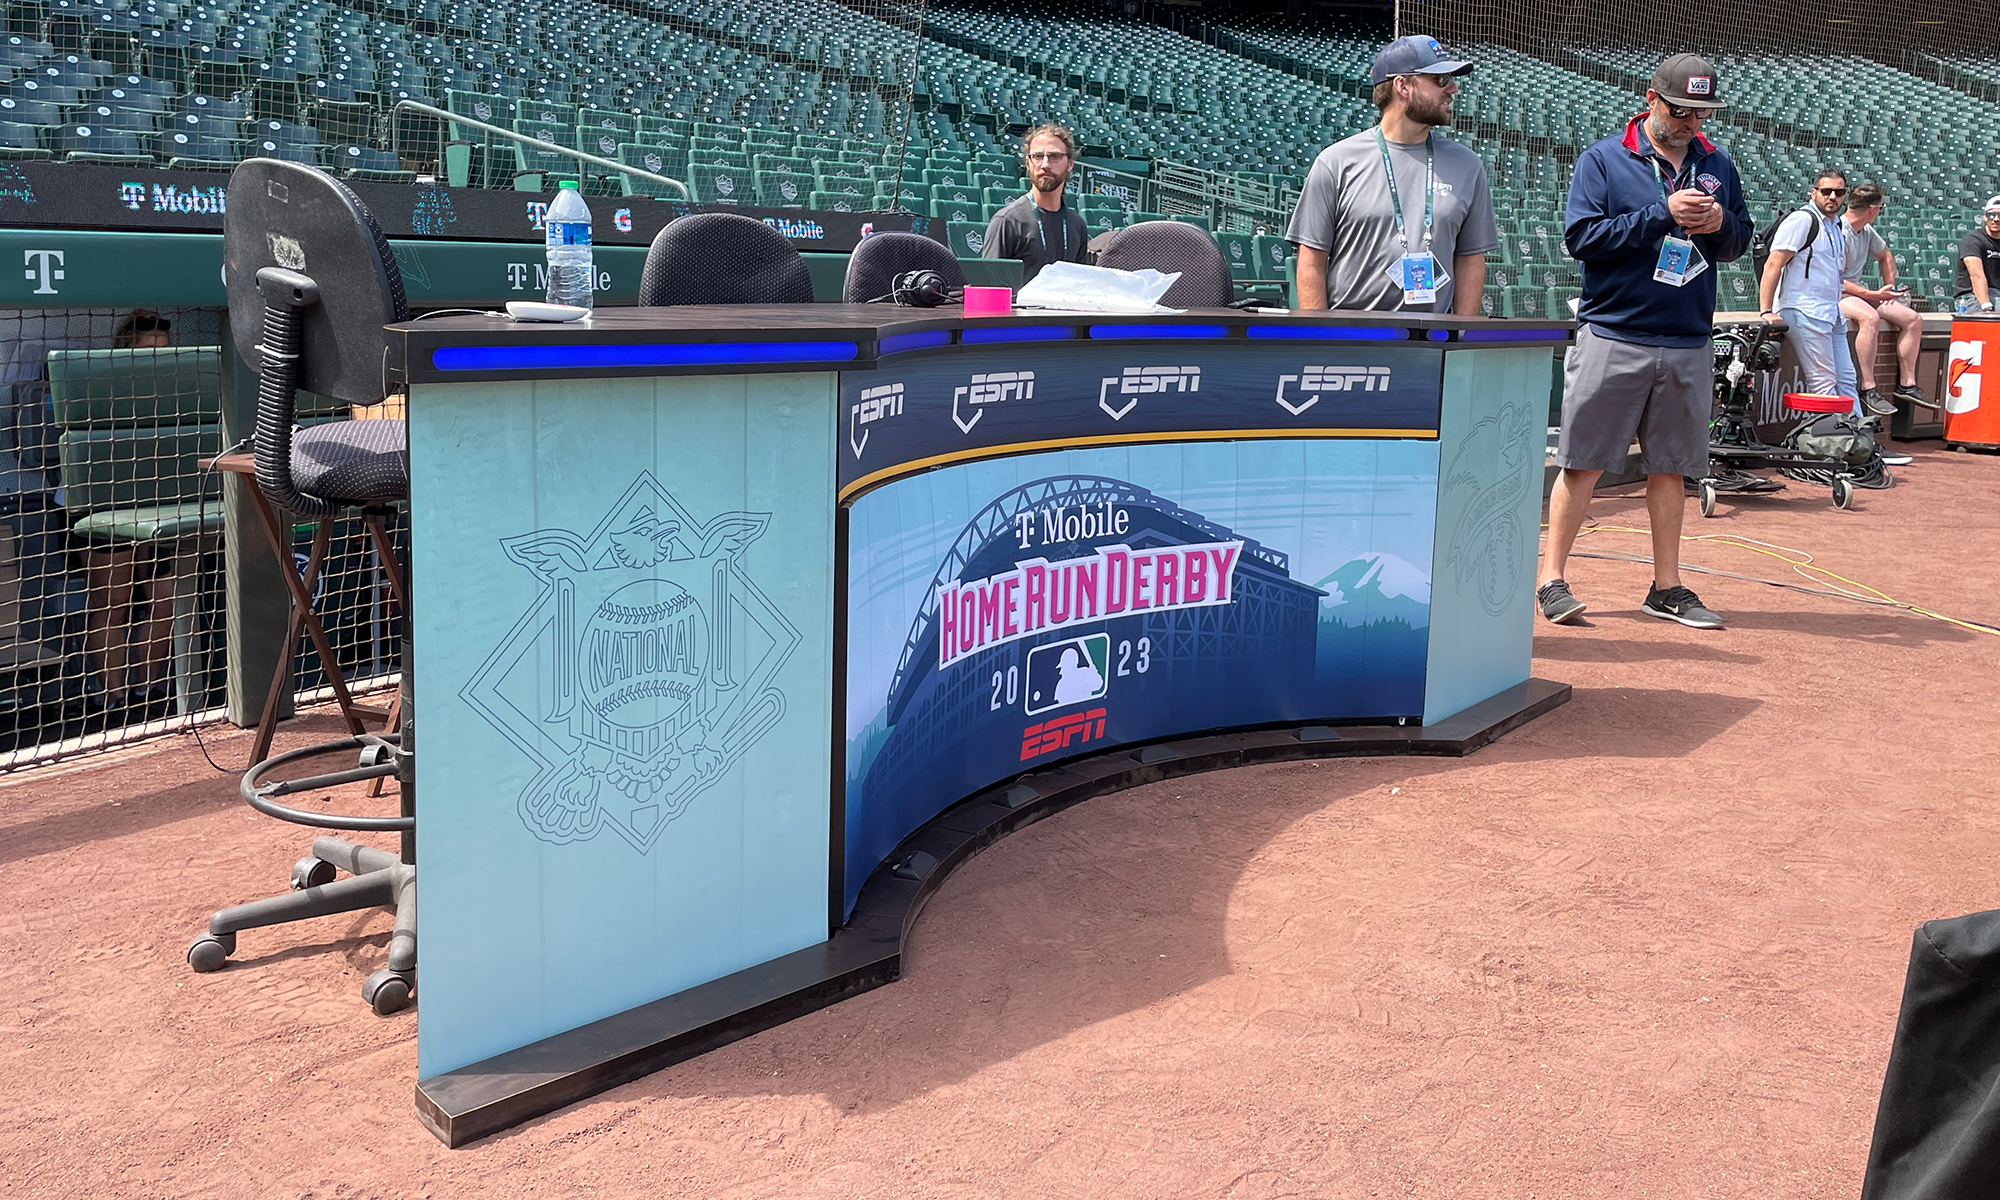 ESPN to Exclusively Televise the 2022 T-Mobile Home Run Derby as Part of  Significant Week of MLB Coverage from Los Angeles - ESPN Press Room U.S.